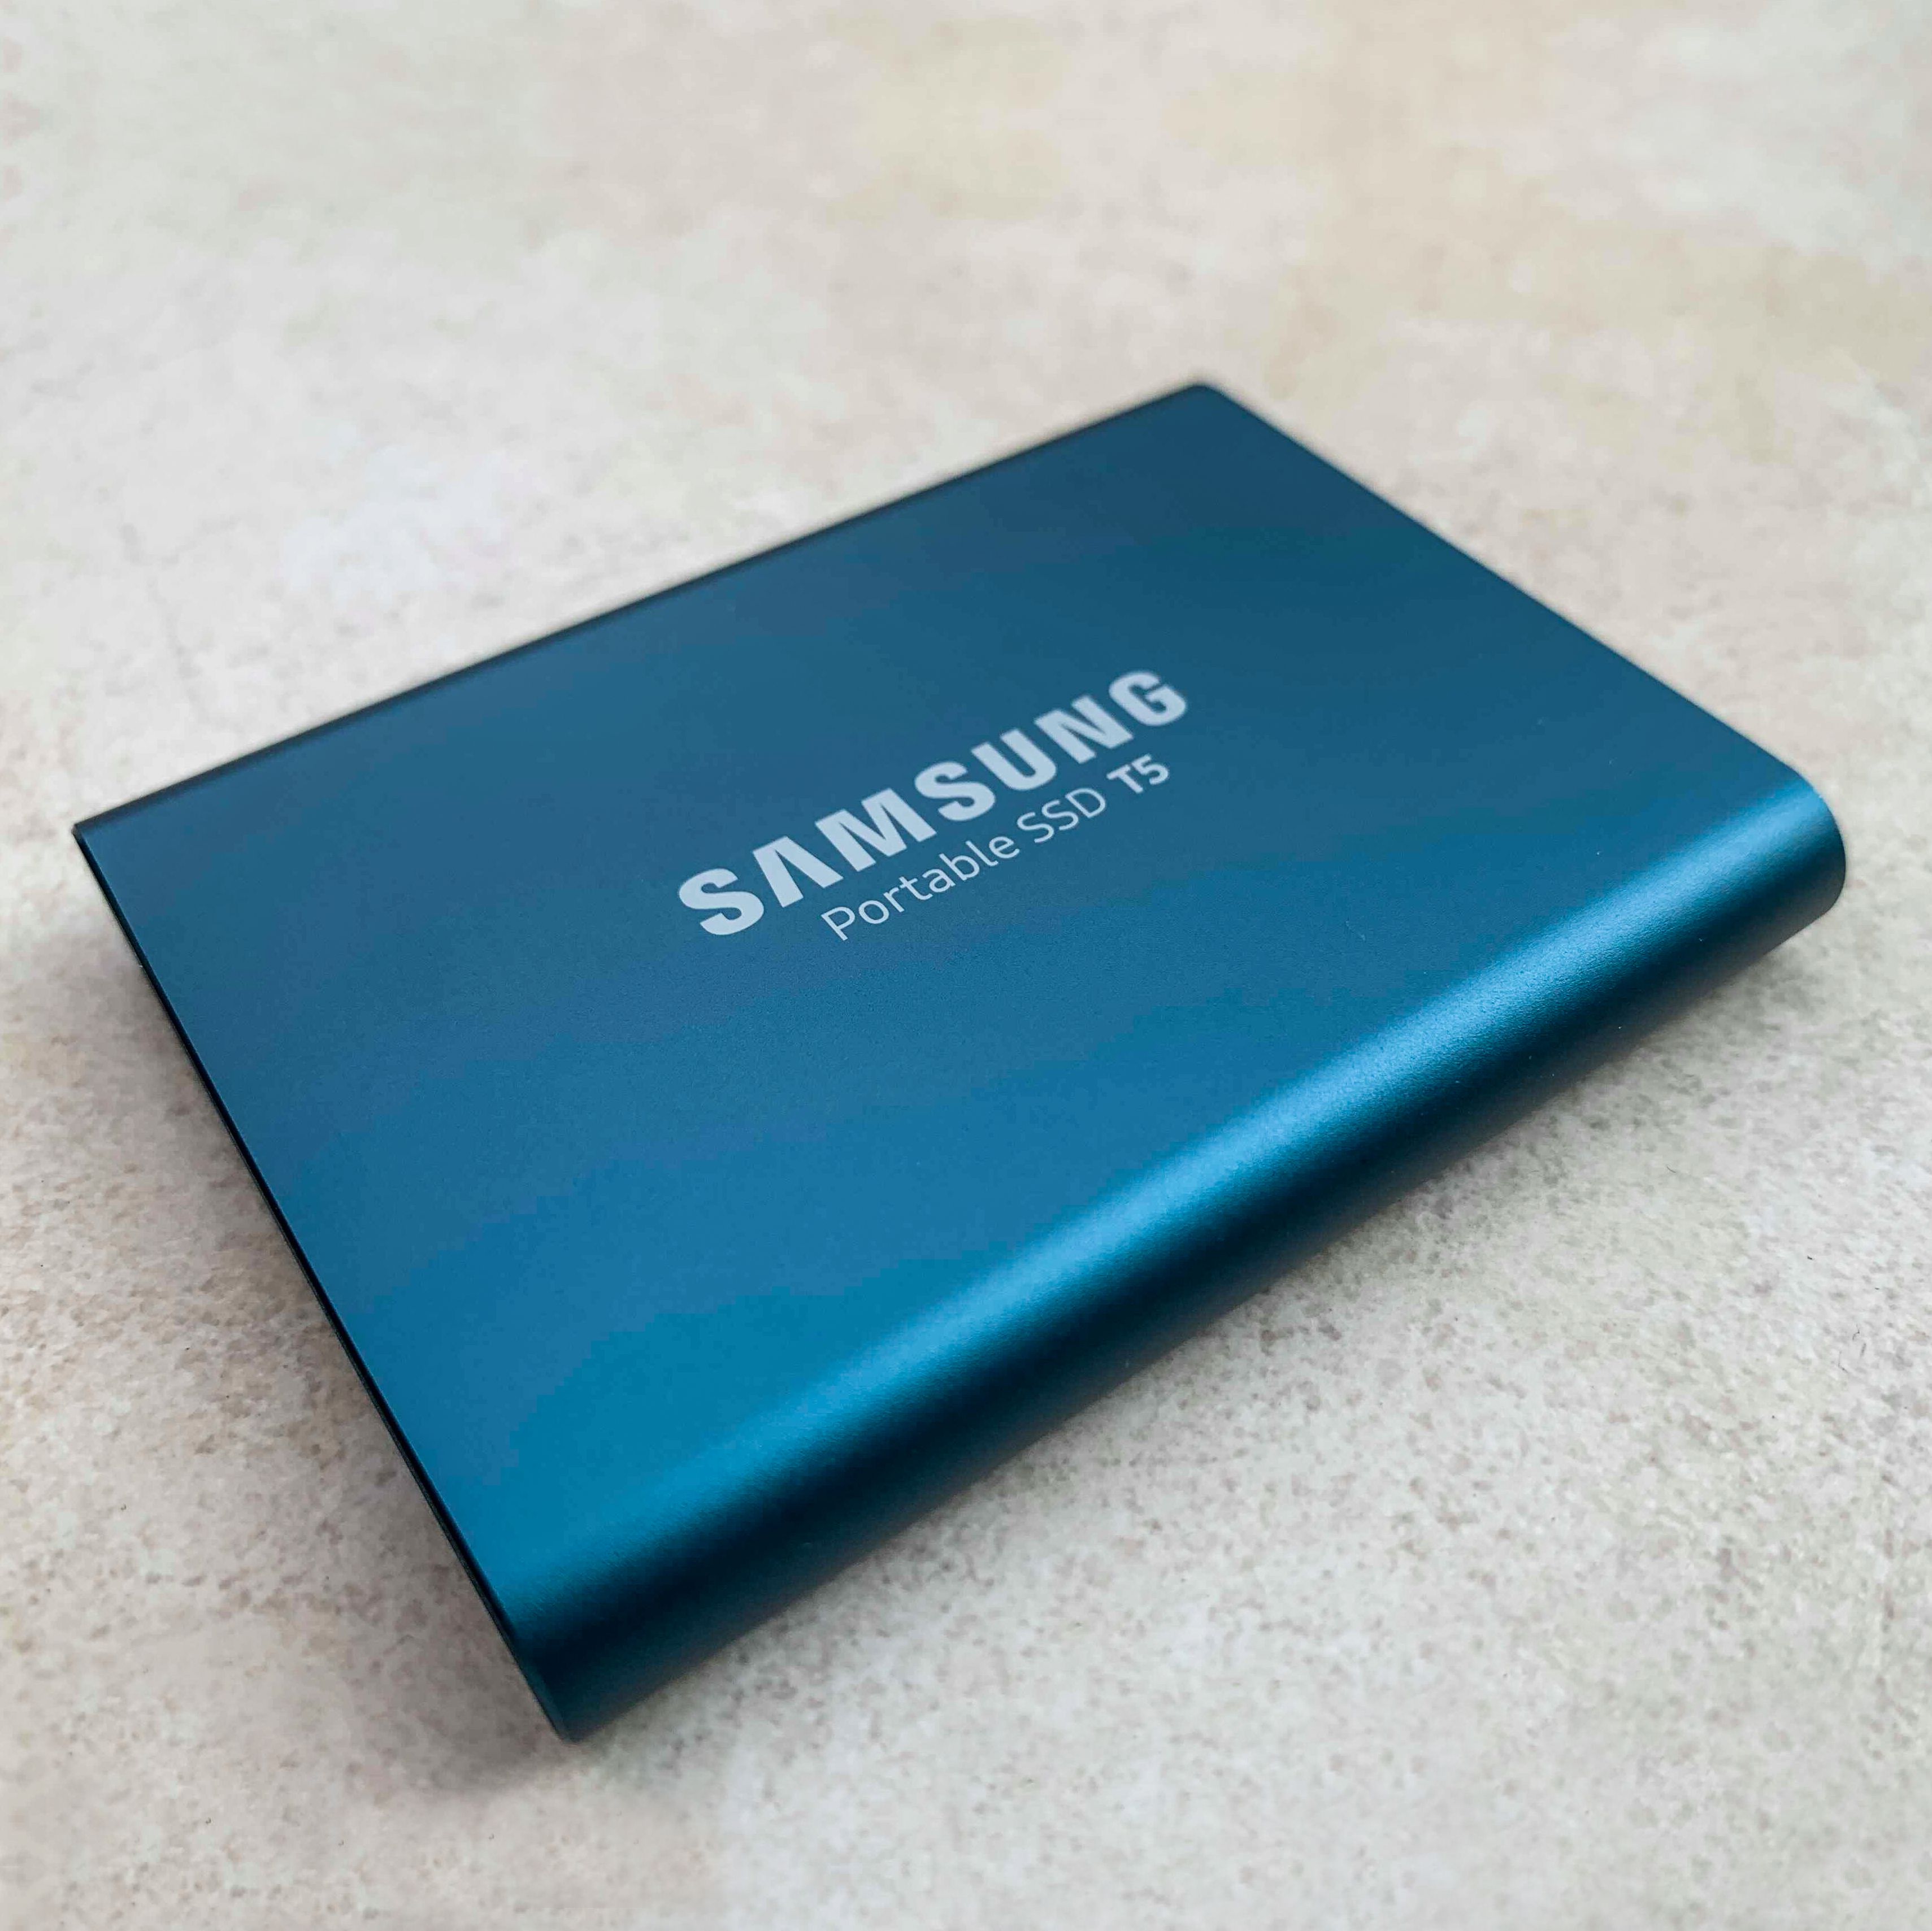 What format is best for samsung ssd t5 macbook